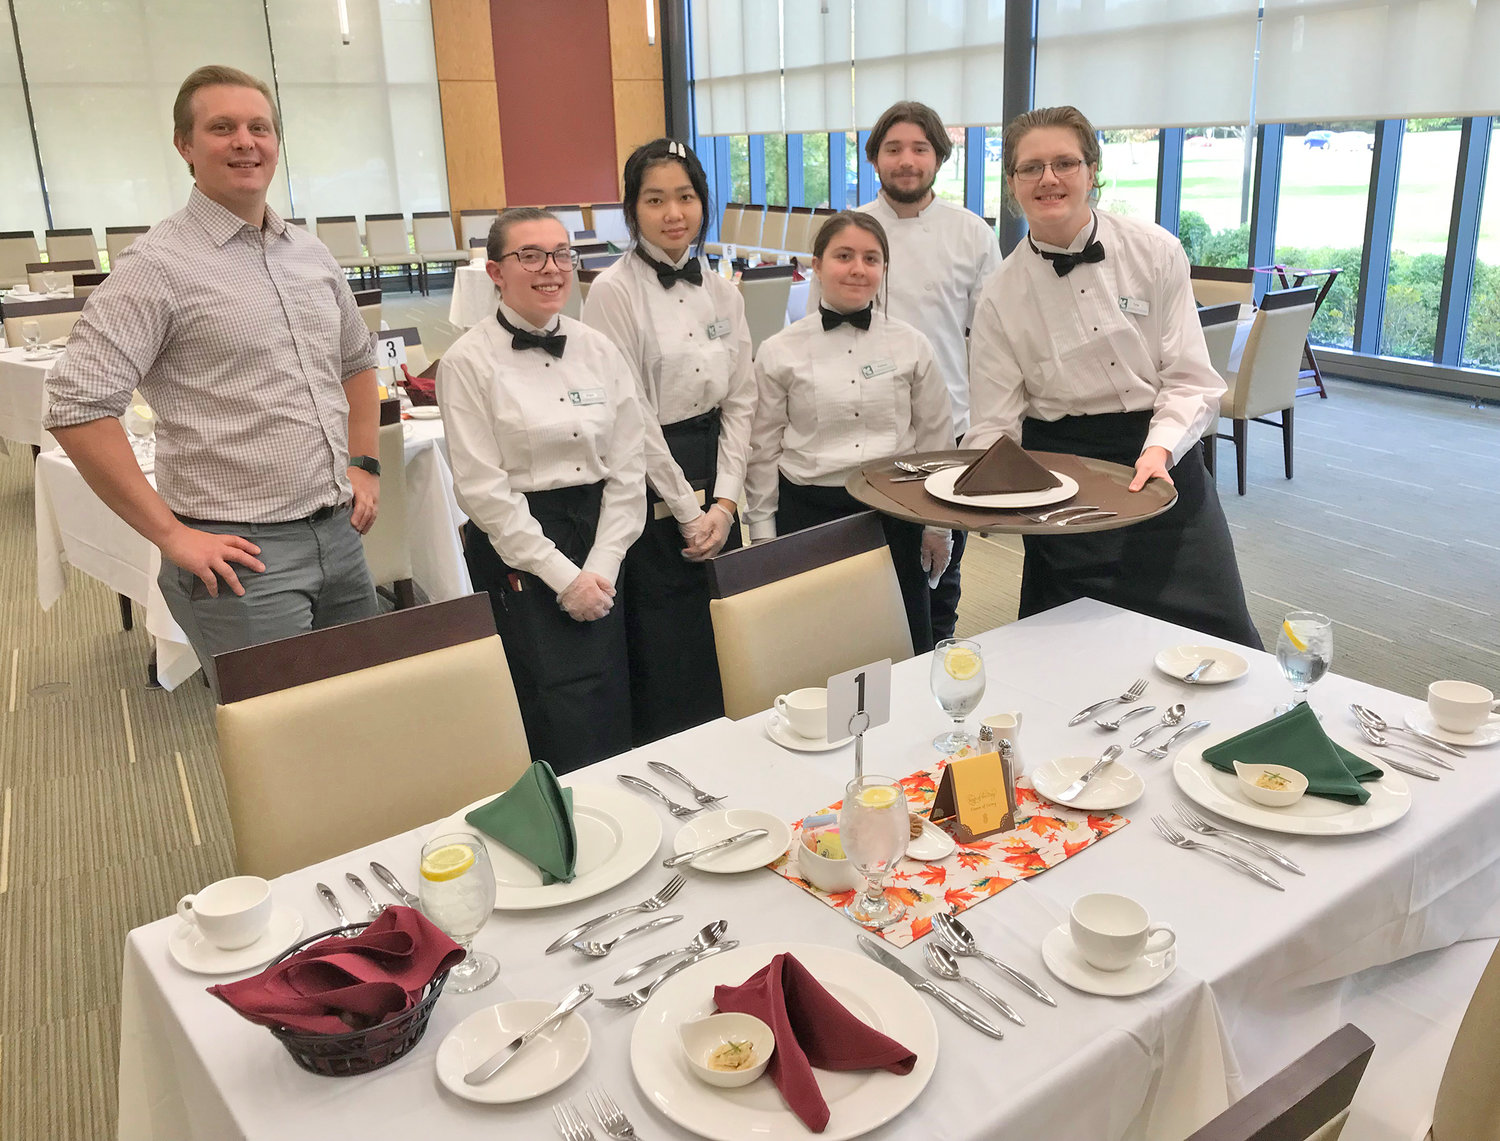 Mohawk Valley Community College hospitality program Director Vincent Petronio, left, and students, from left, Angel Lamb, Moolay Shee, Raelynn Briggs, Zach Getz and Tyler Hall invite the public out to the campus Wednesdays through Nov. 16 for gourmet luncheons prepared and served by the students themselves. Information on that program is available online at https://www.mvcc.edu/news/2022-10-06-mvcc-hospitality-students-offering-full-service-luncheons-on-rome-campus.php.